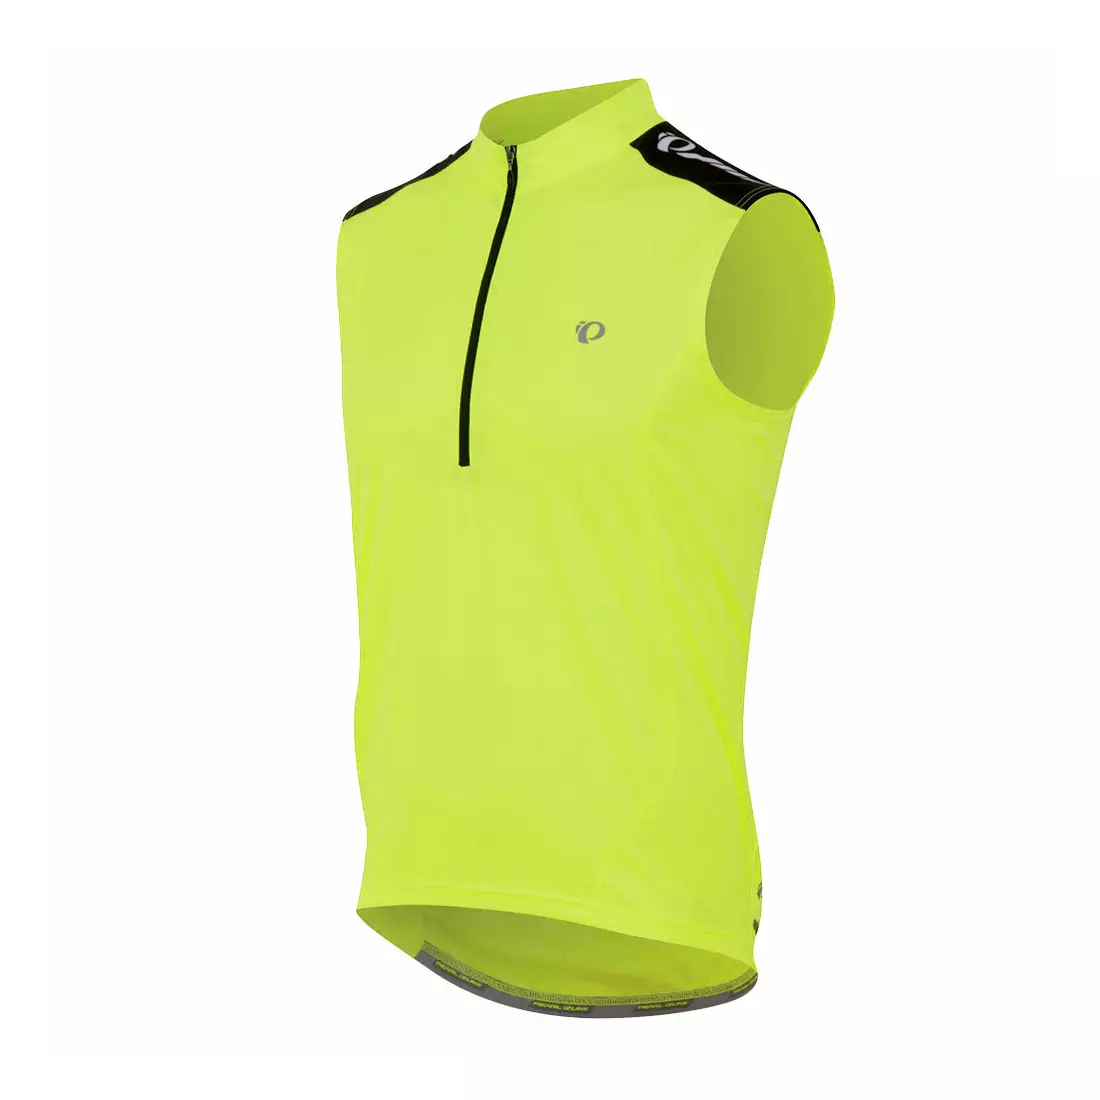 PEARL IZUMI SELECT QUEST - men's sleeveless cycling jersey 11121408-428